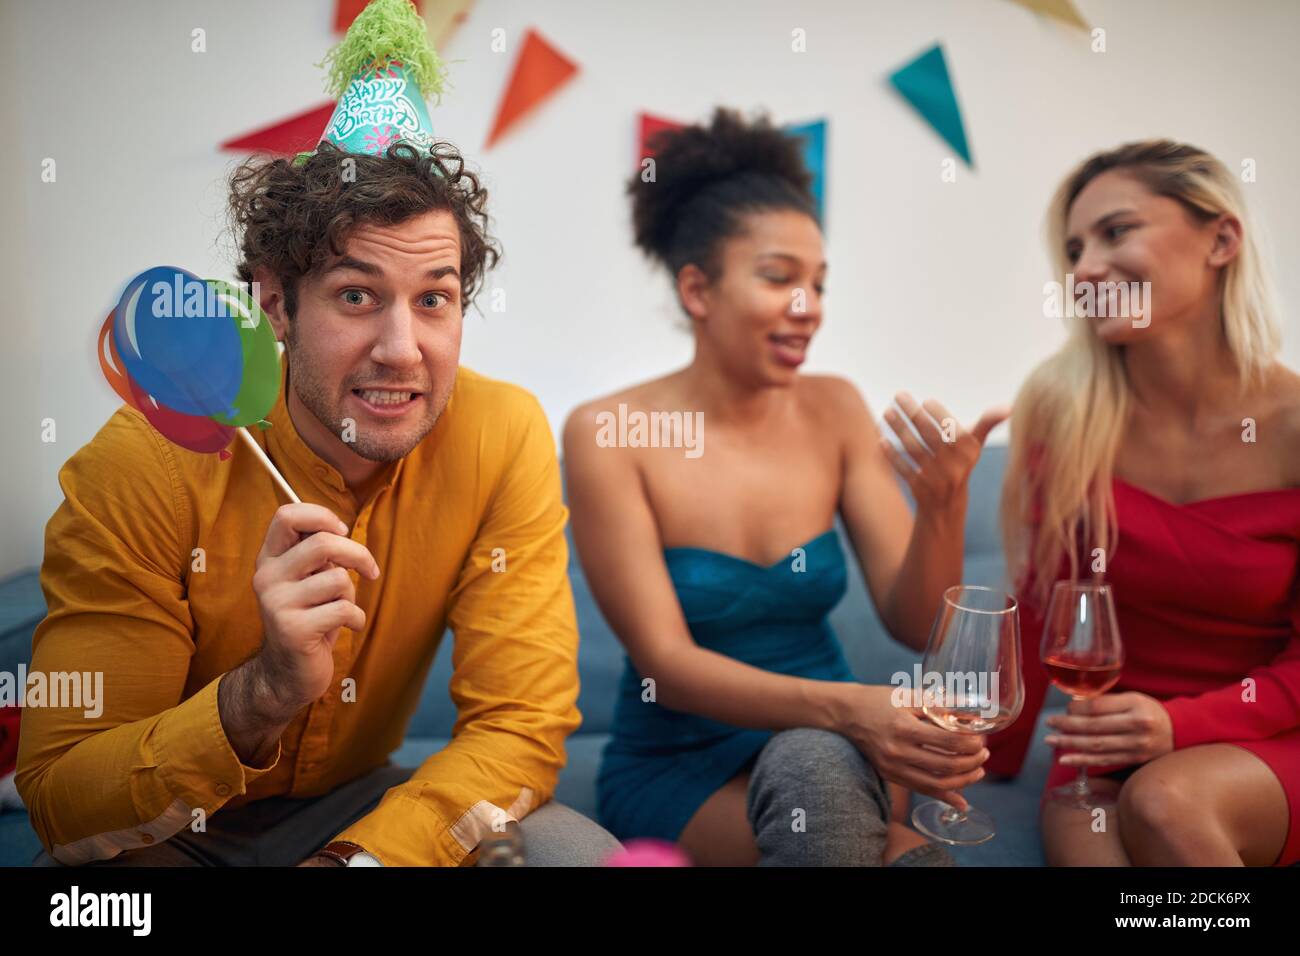 bored caucasian guy in company of two multiethnic females making funny face at the party. looking at camera, eye contact Stock Photo